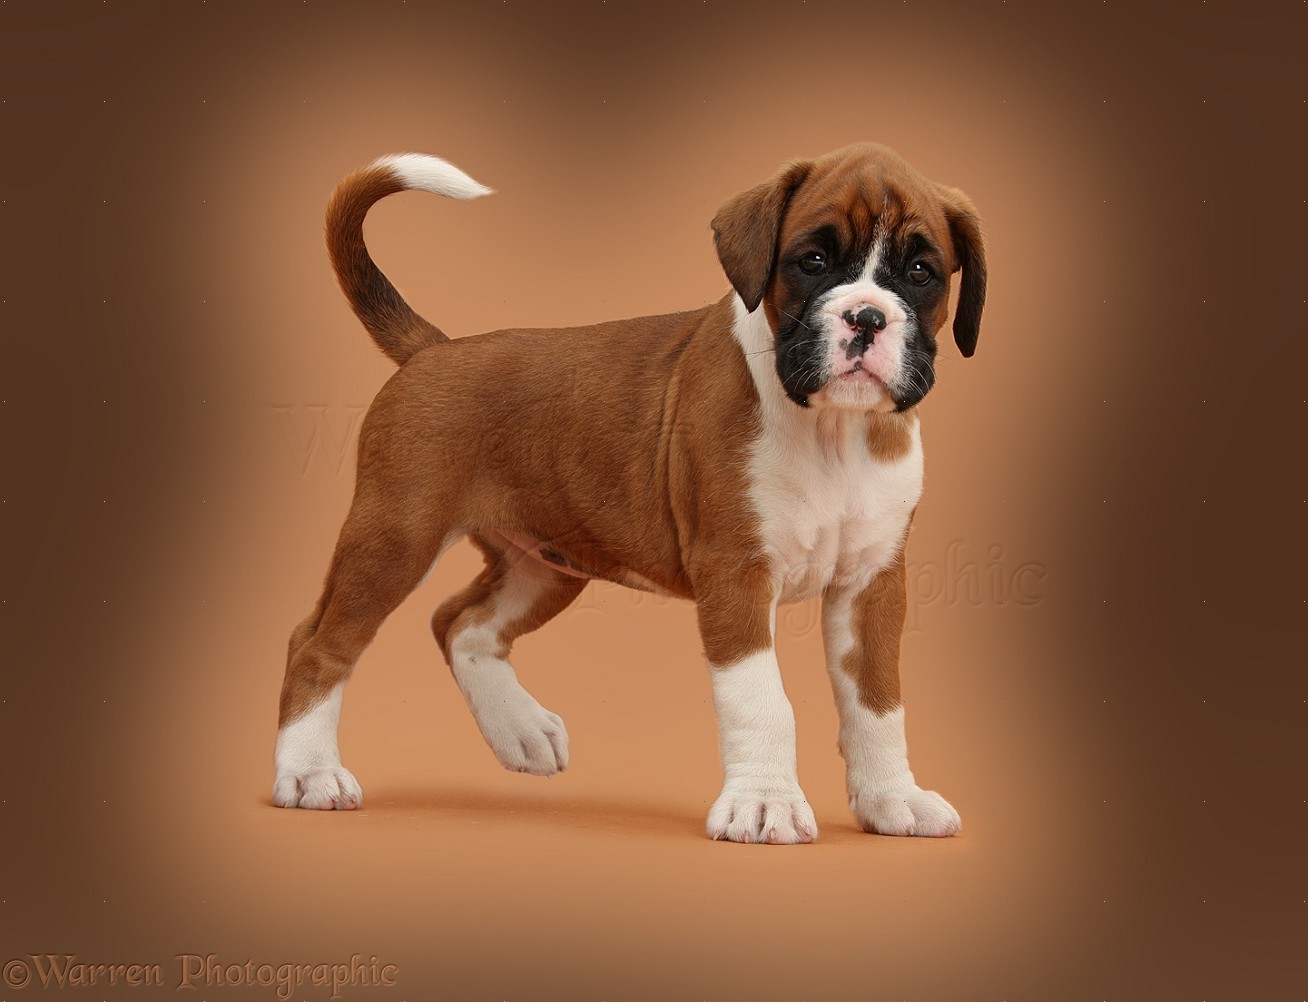 Dog Images of Boxer Puppy On Brown Background, WP39546.